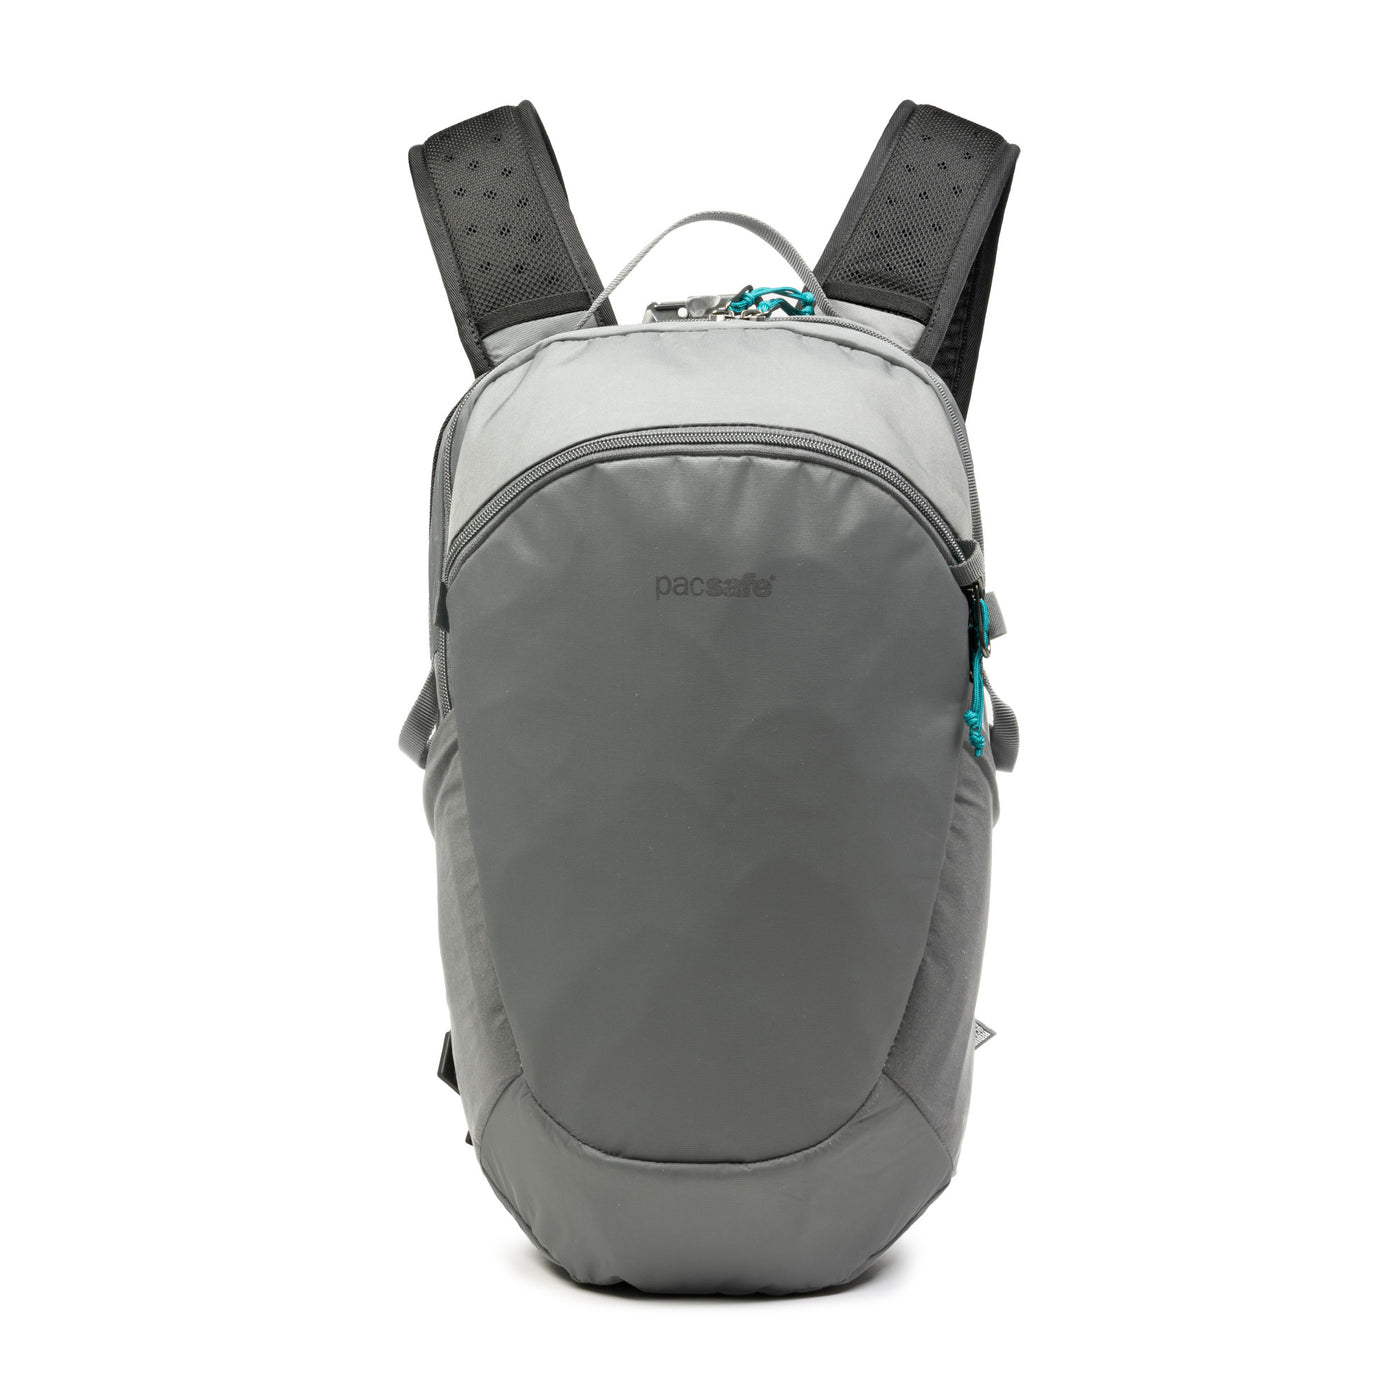 PacsafeECO 18L Backpack